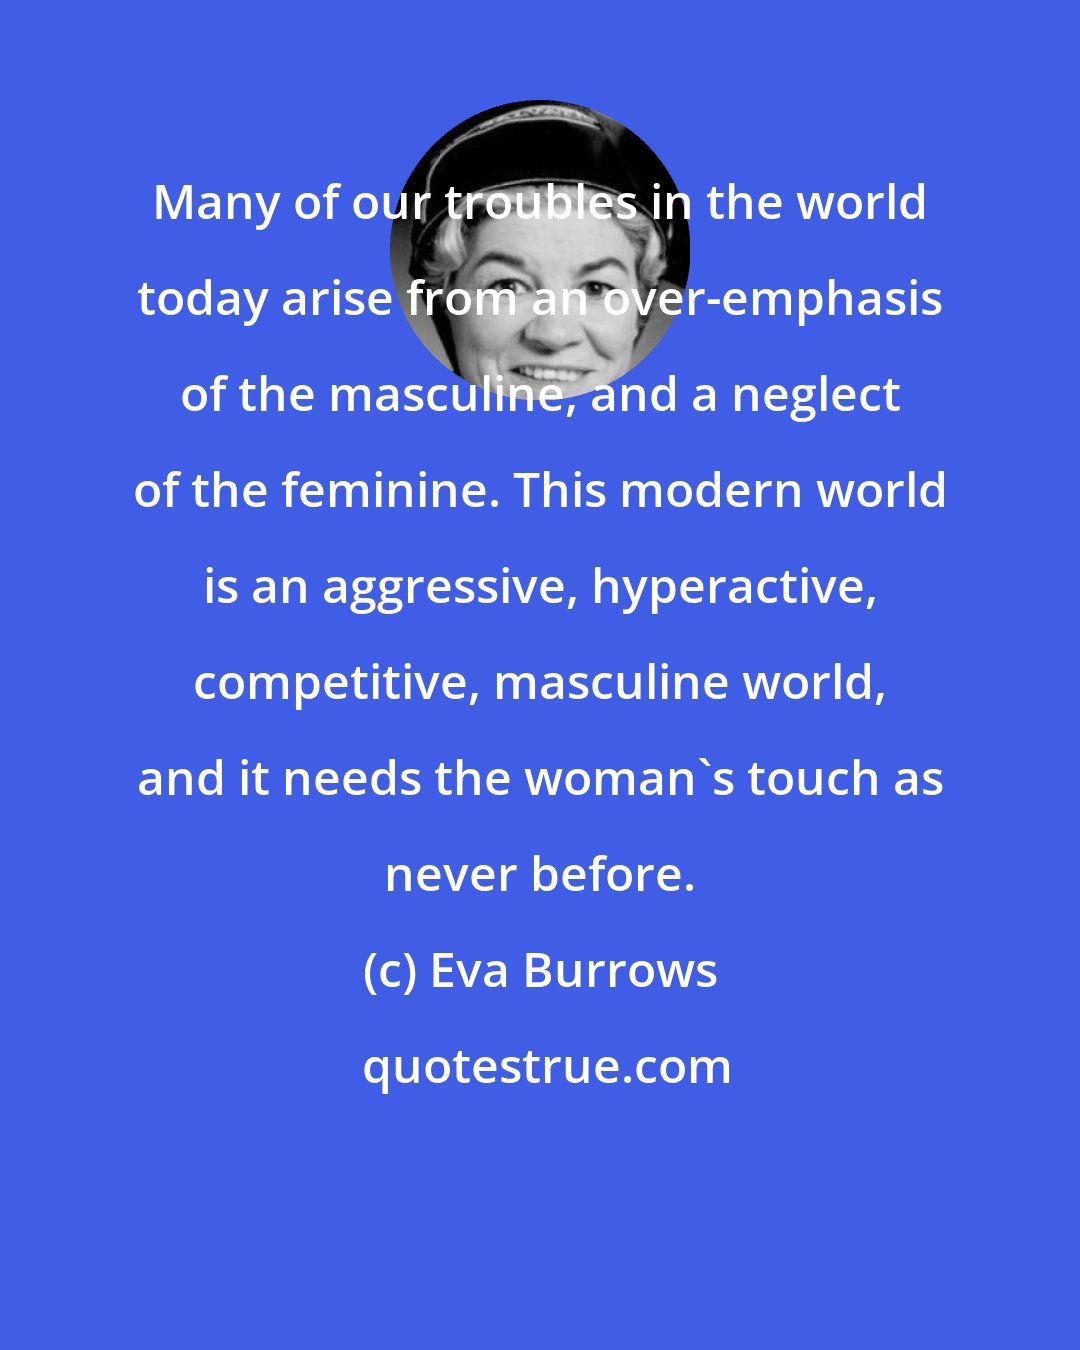 Eva Burrows: Many of our troubles in the world today arise from an over-emphasis of the masculine, and a neglect of the feminine. This modern world is an aggressive, hyperactive, competitive, masculine world, and it needs the woman's touch as never before.